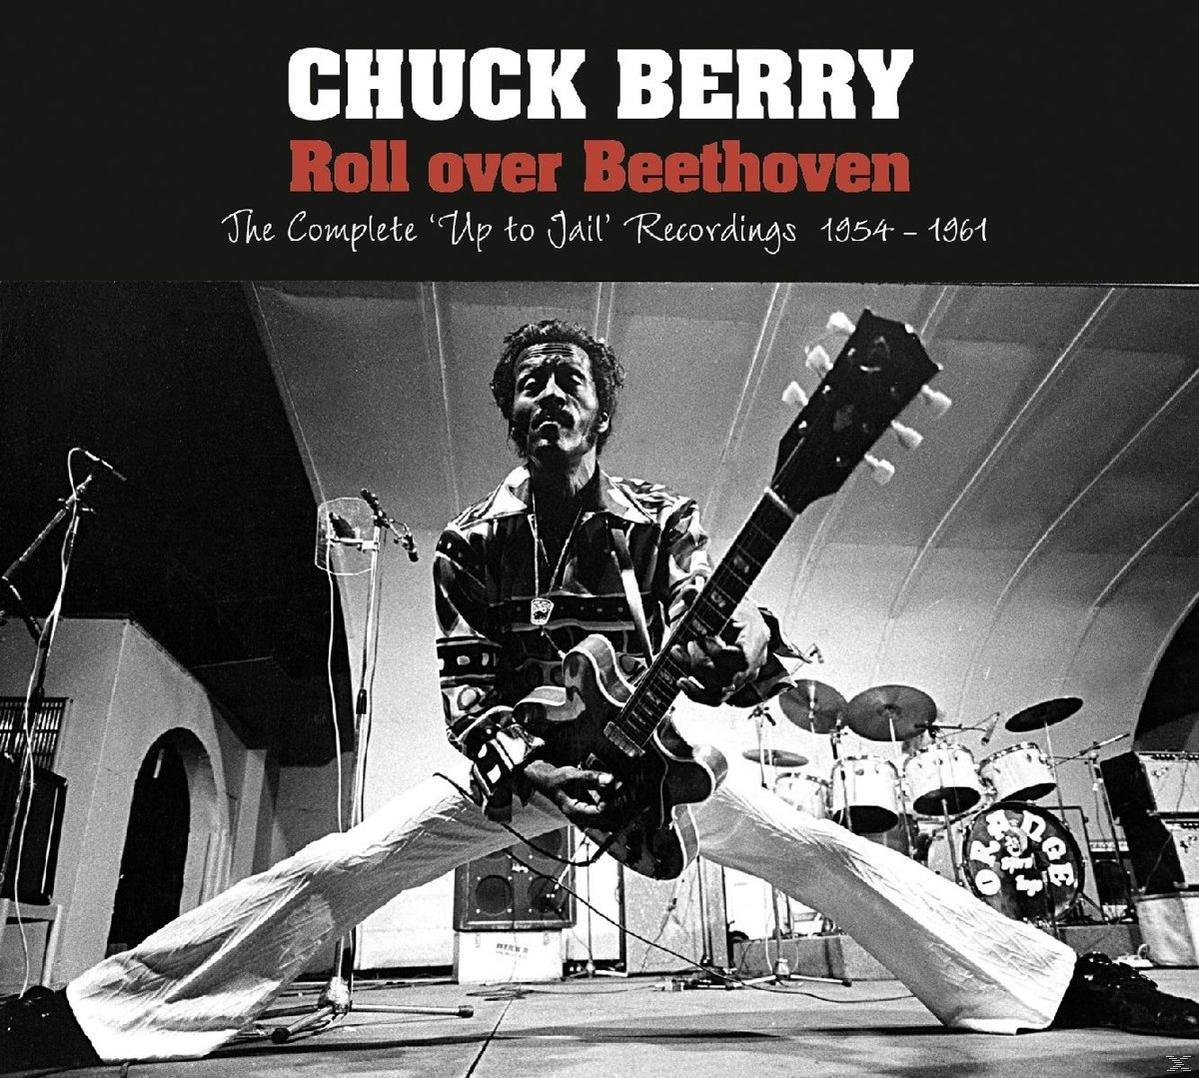 Over (CD) - Roll Berry Beethoven - Chuck